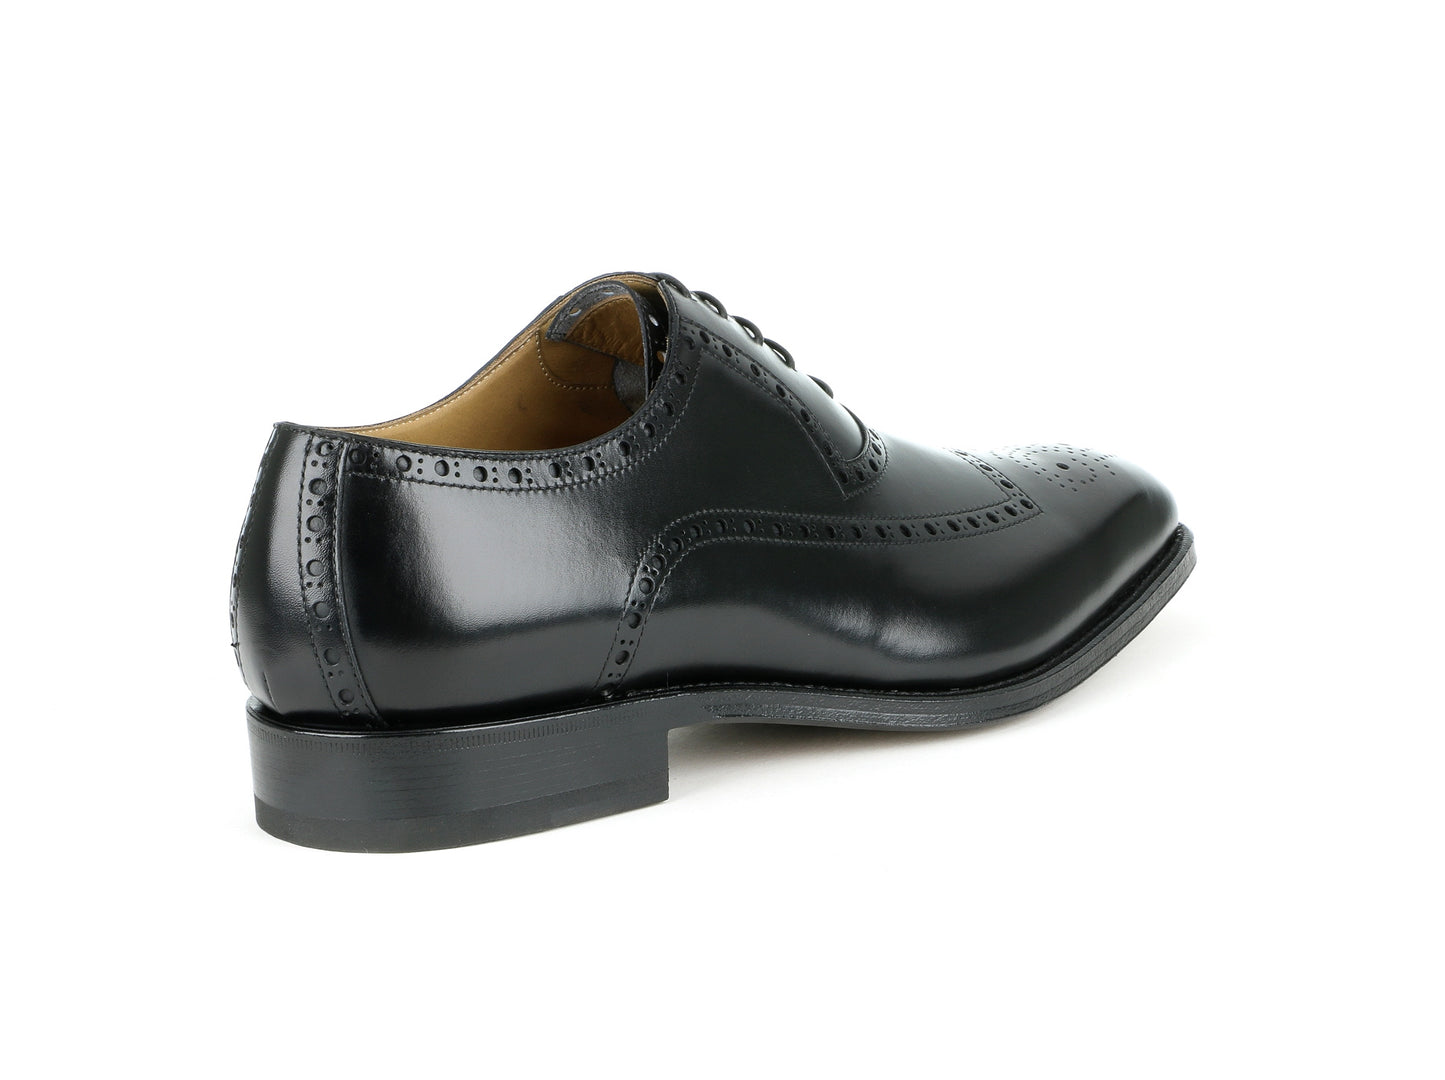 Leather Oxford shoe